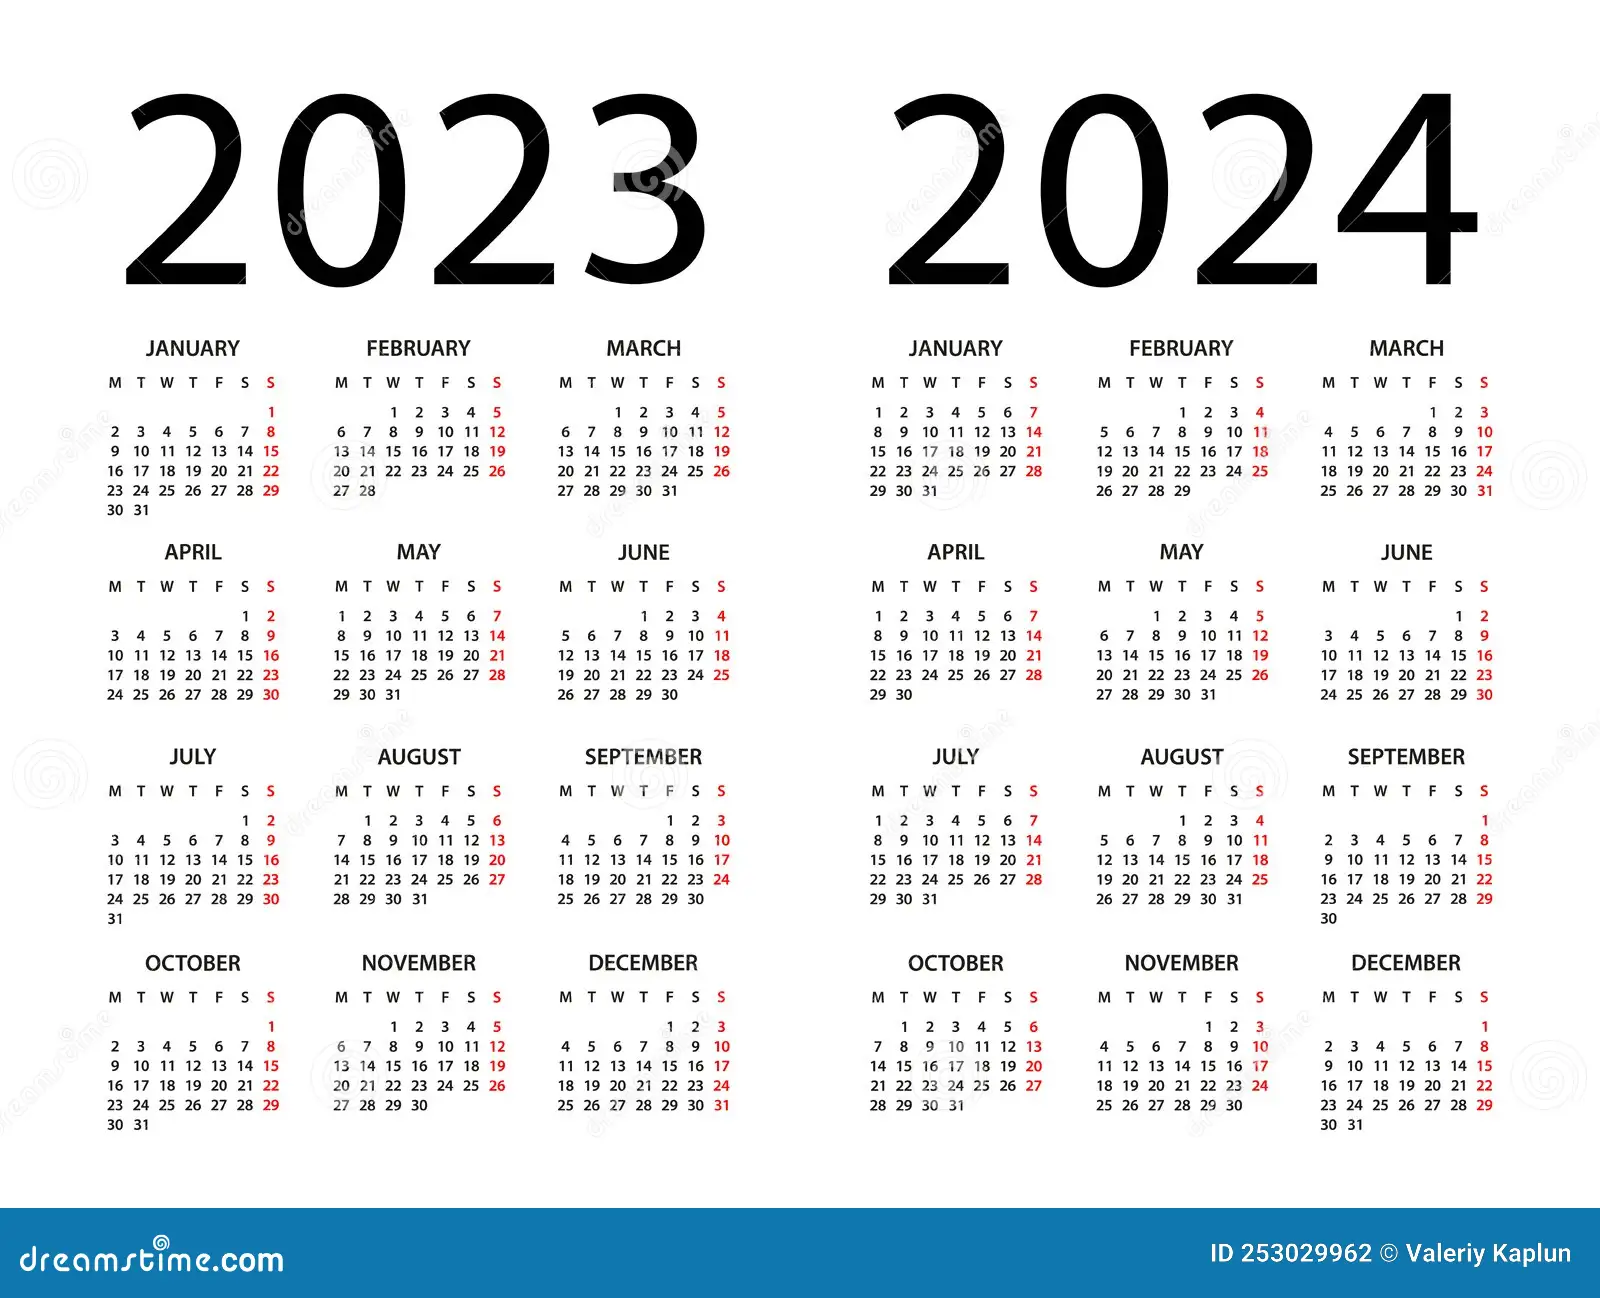 Stagione 2023/2024